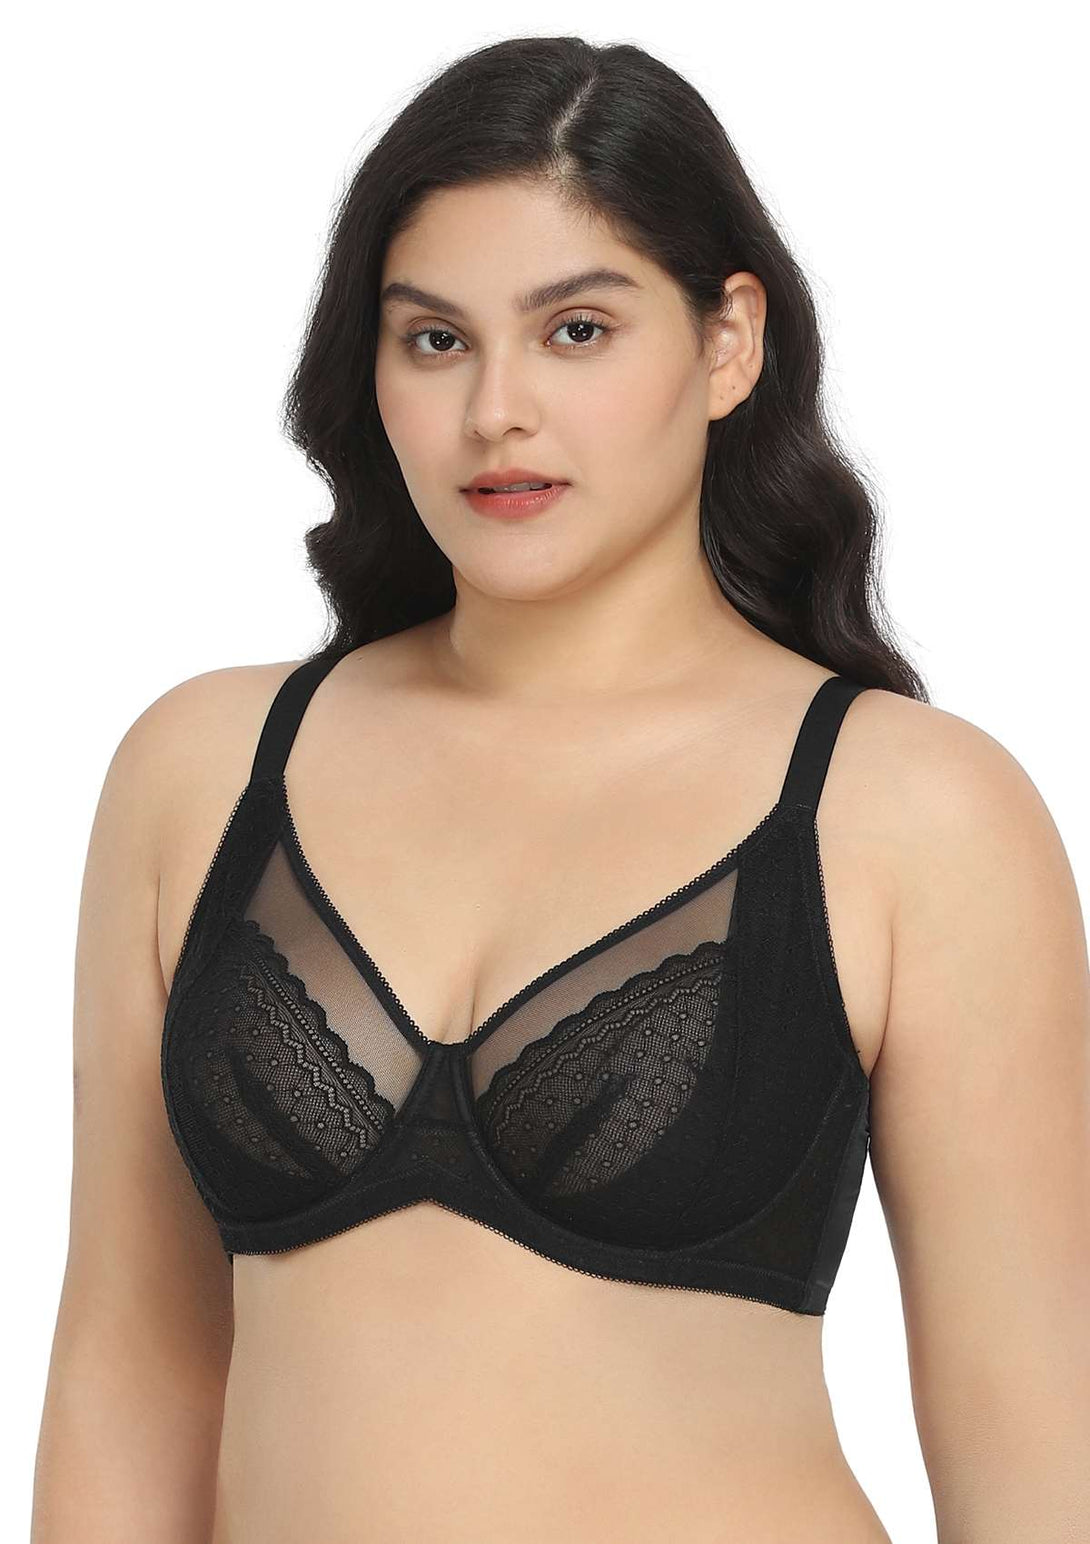 HSIA-EASTERBOGO Silhouette Polka Dot Lace Unlined Bra